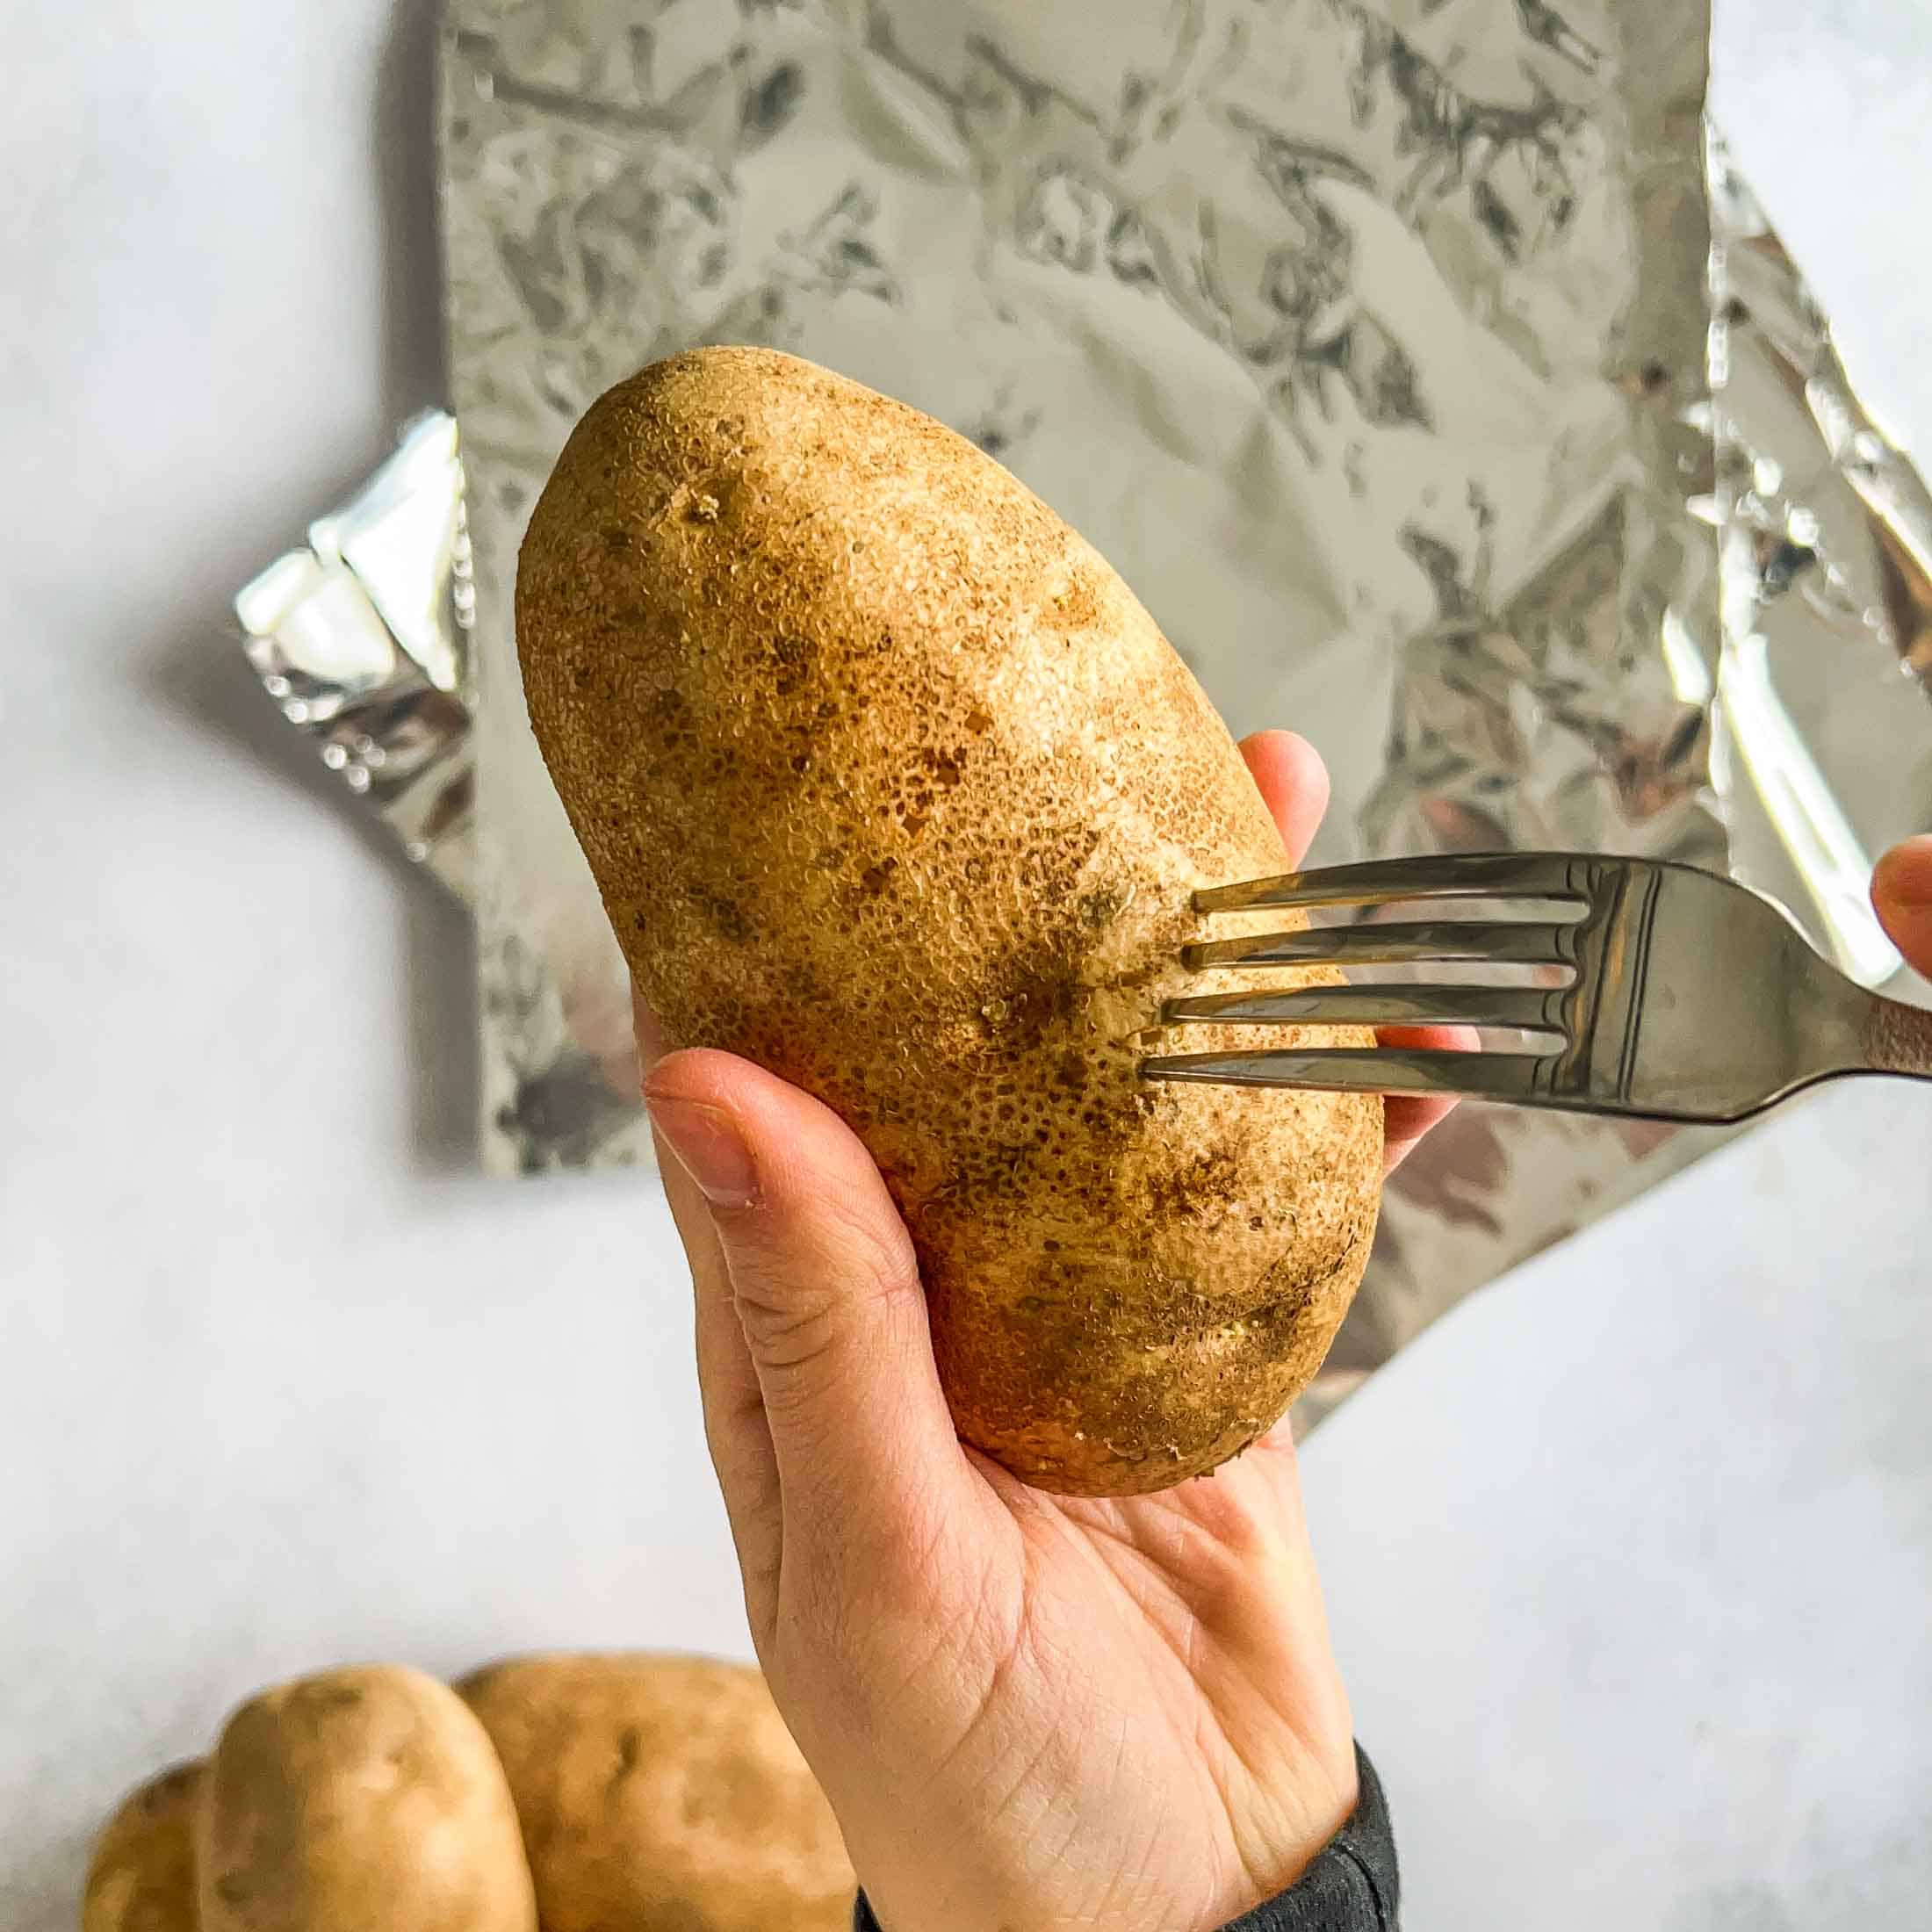 Poking holes in a potato before wrapping in foil and smoking.